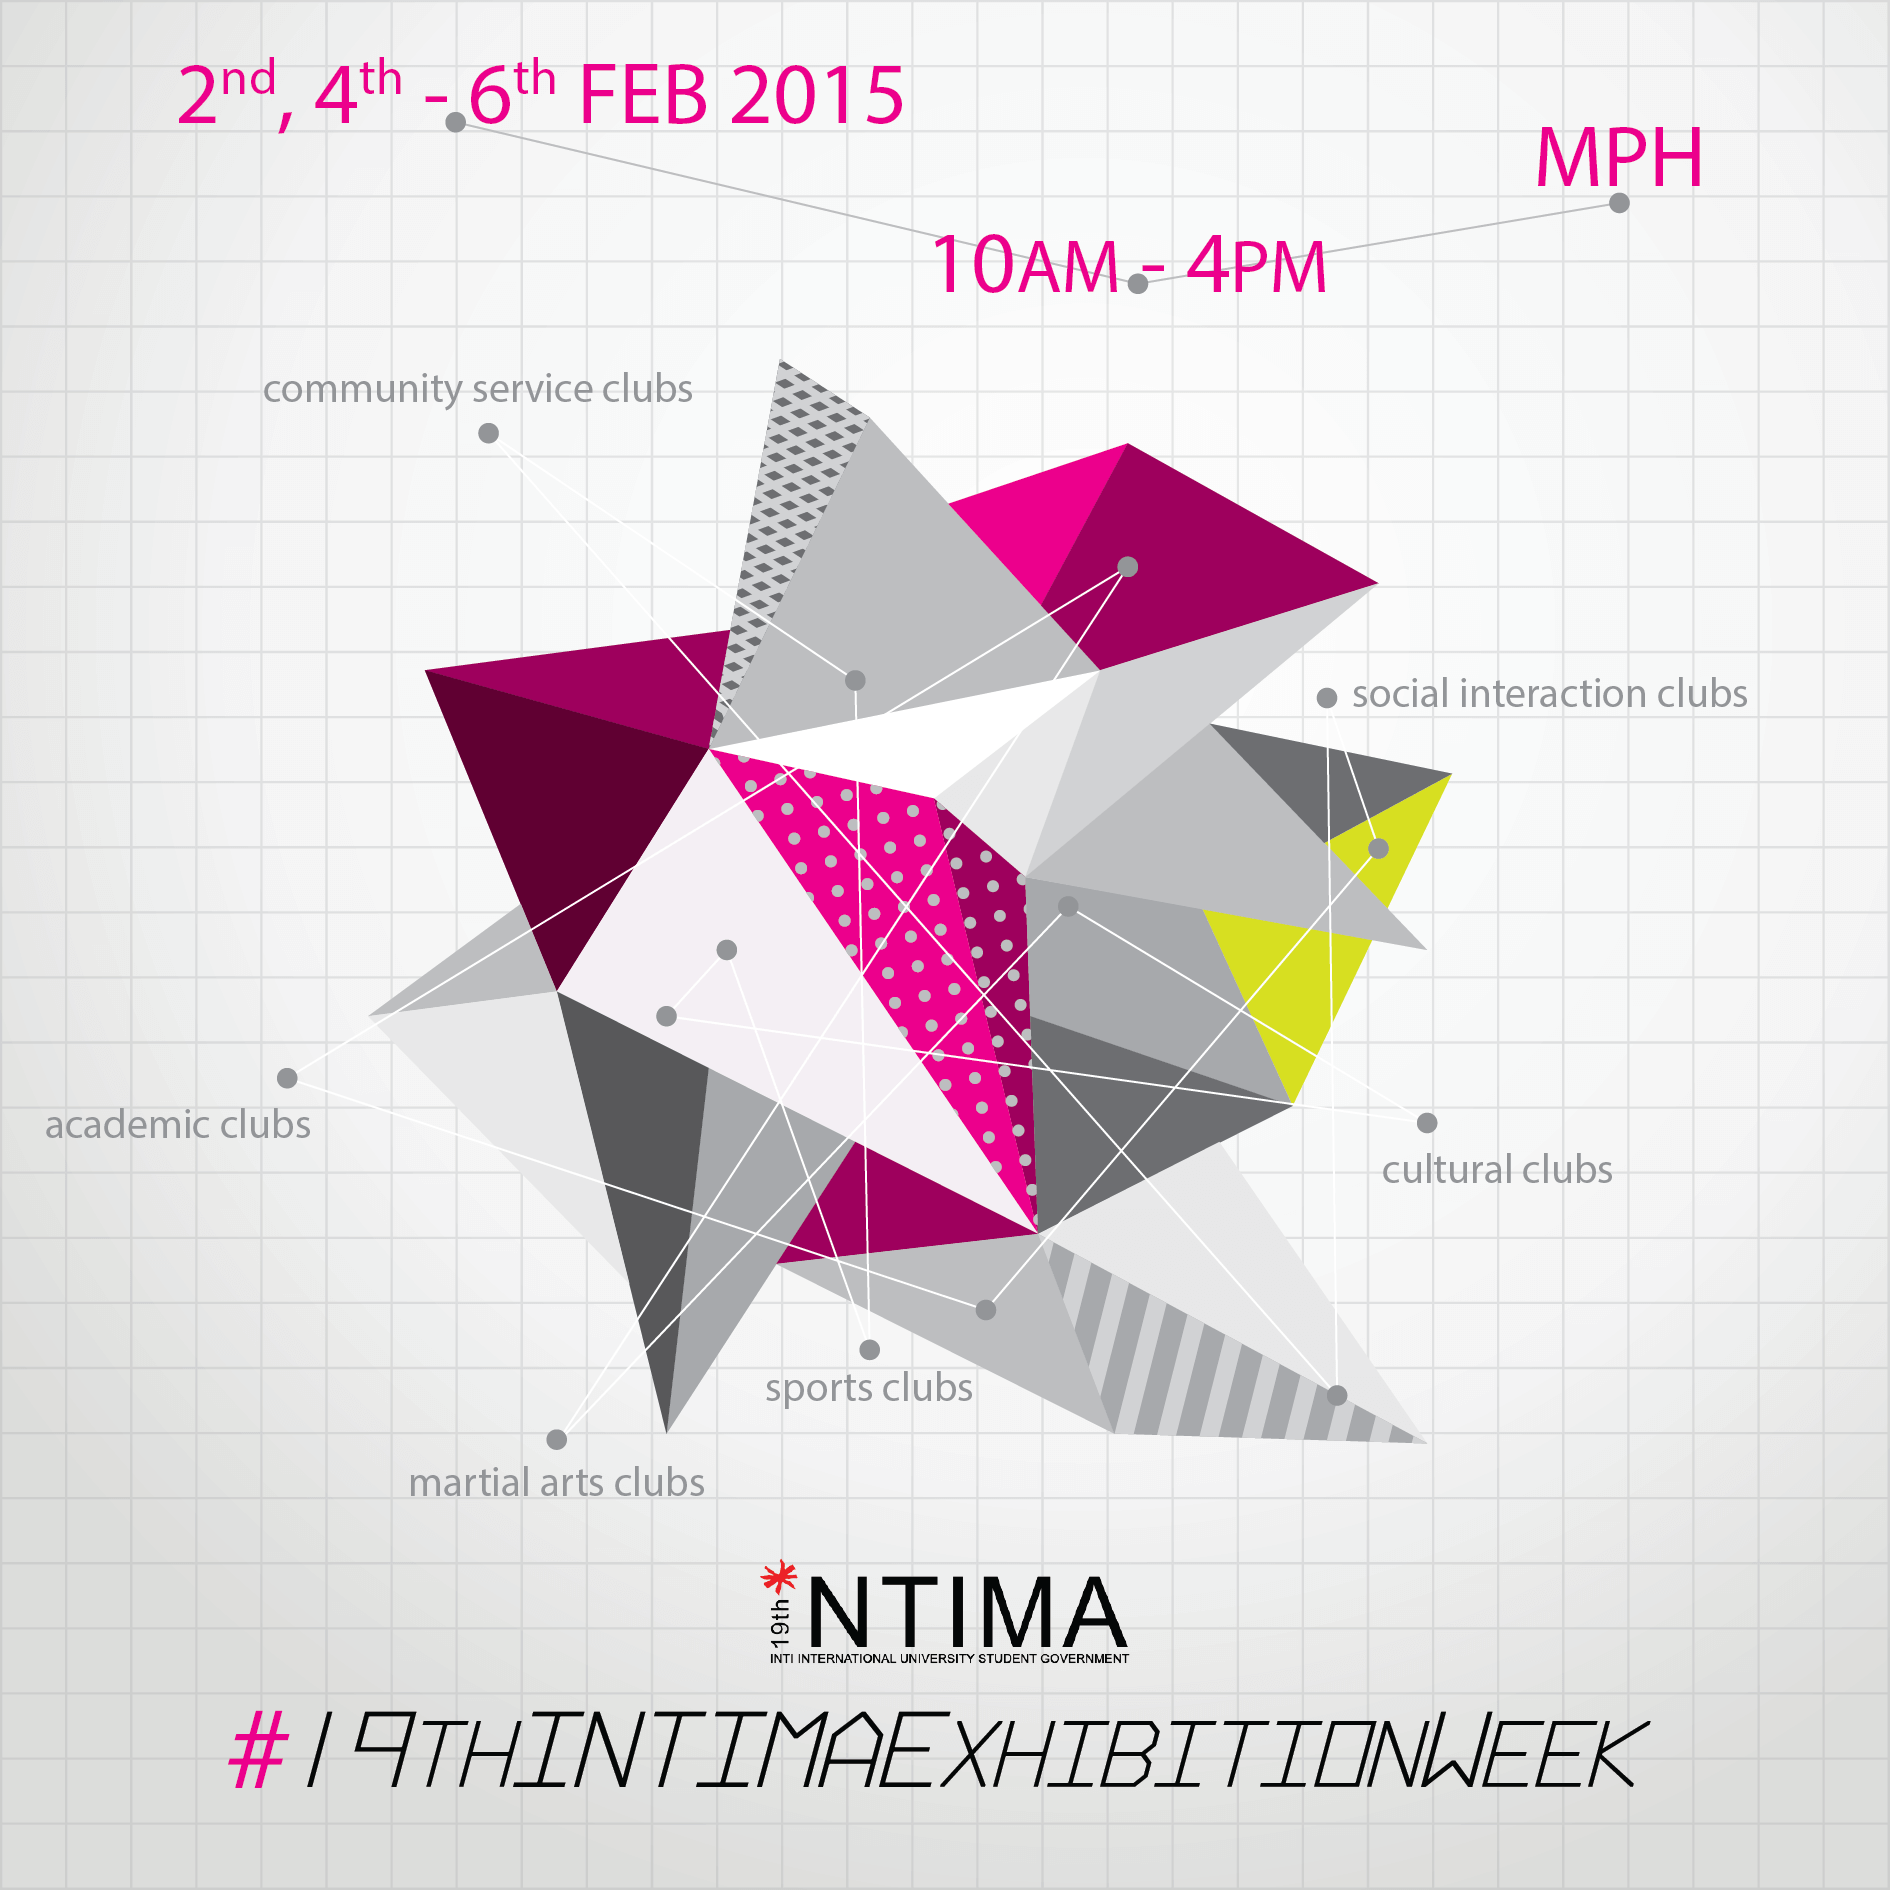 INTIMA Exhibition Week social media collateral